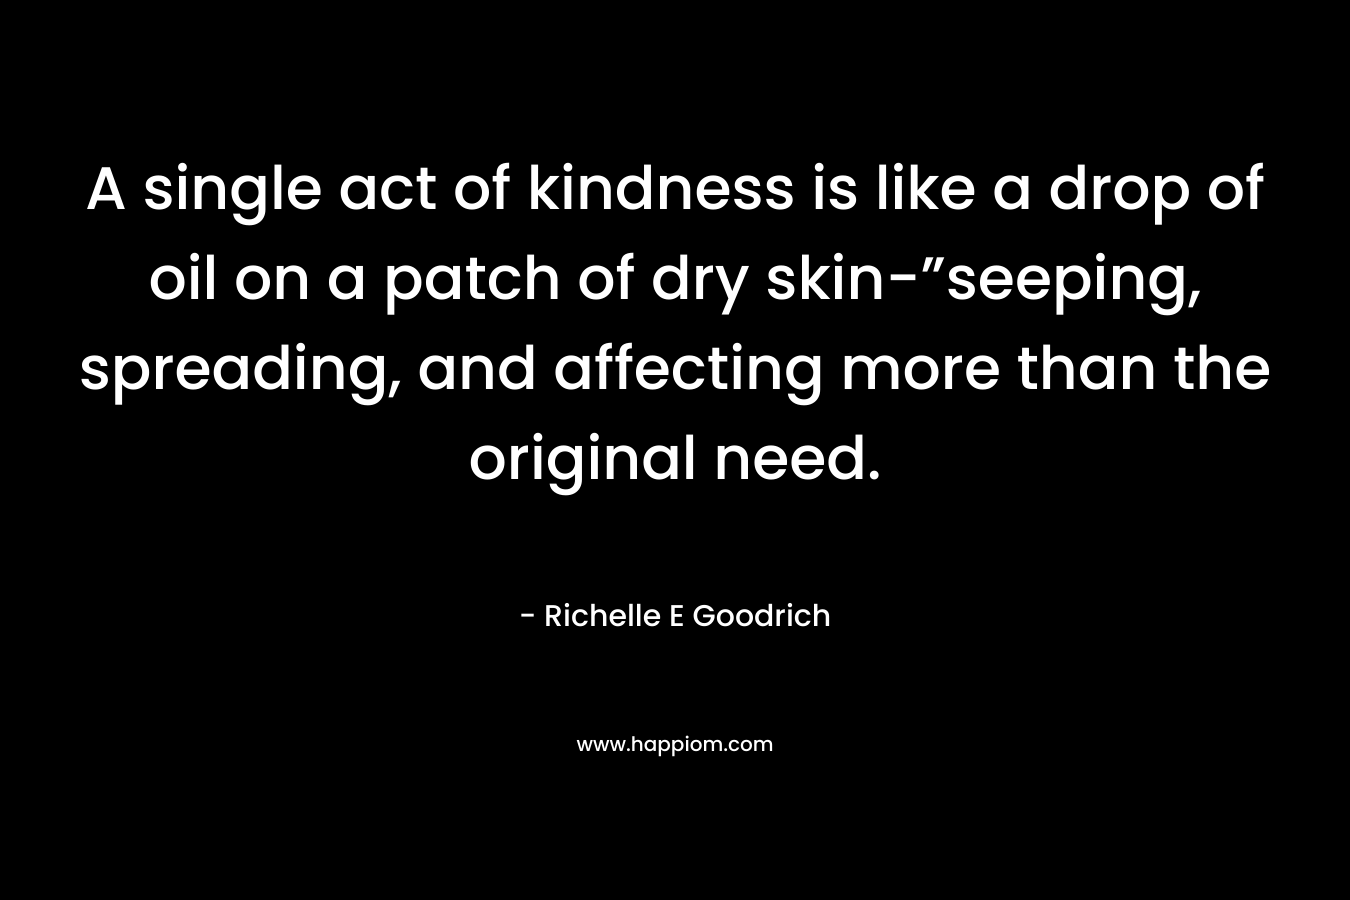 A single act of kindness is like a drop of oil on a patch of dry skin-”seeping, spreading, and affecting more than the original need.